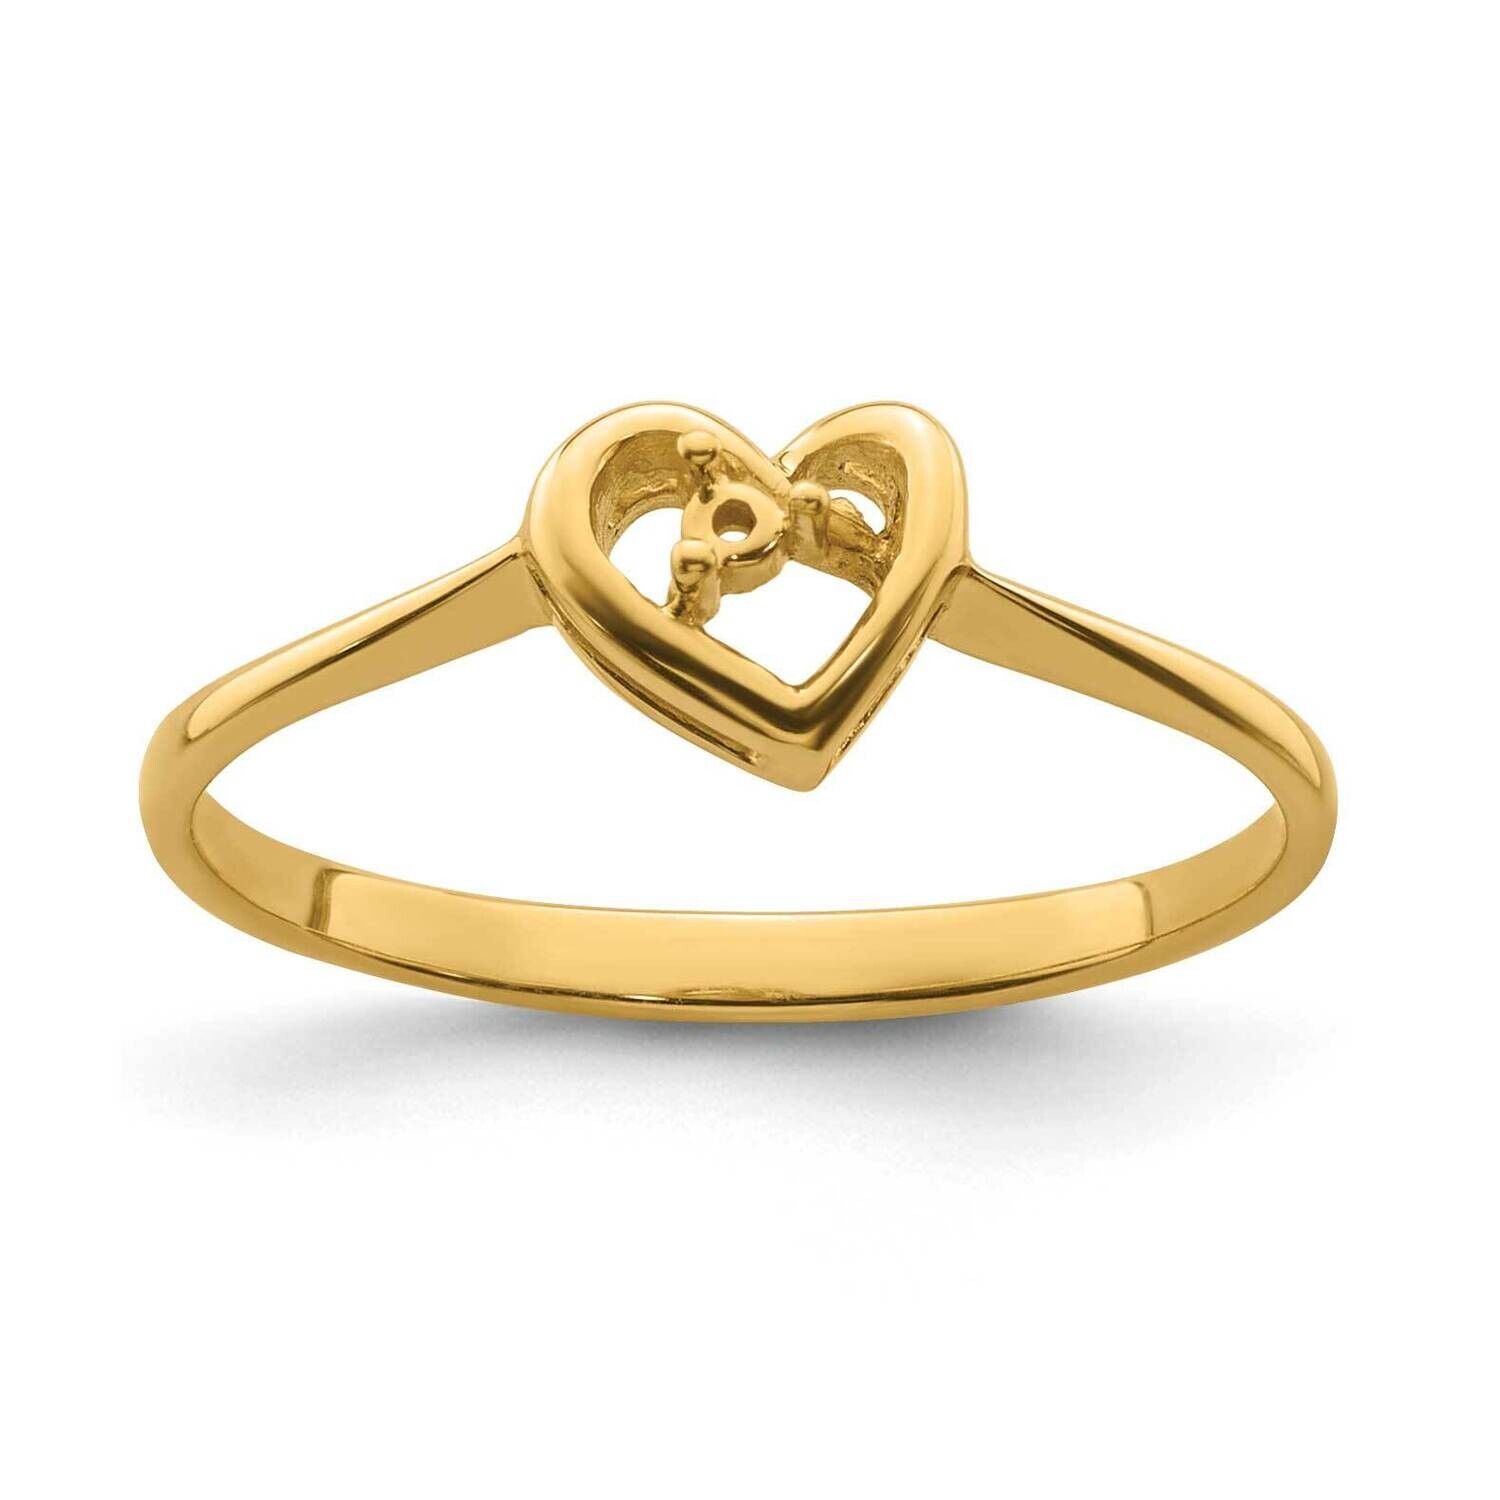 0.02ct. Diamond Heart Ring Mounting 14k Gold Y4185